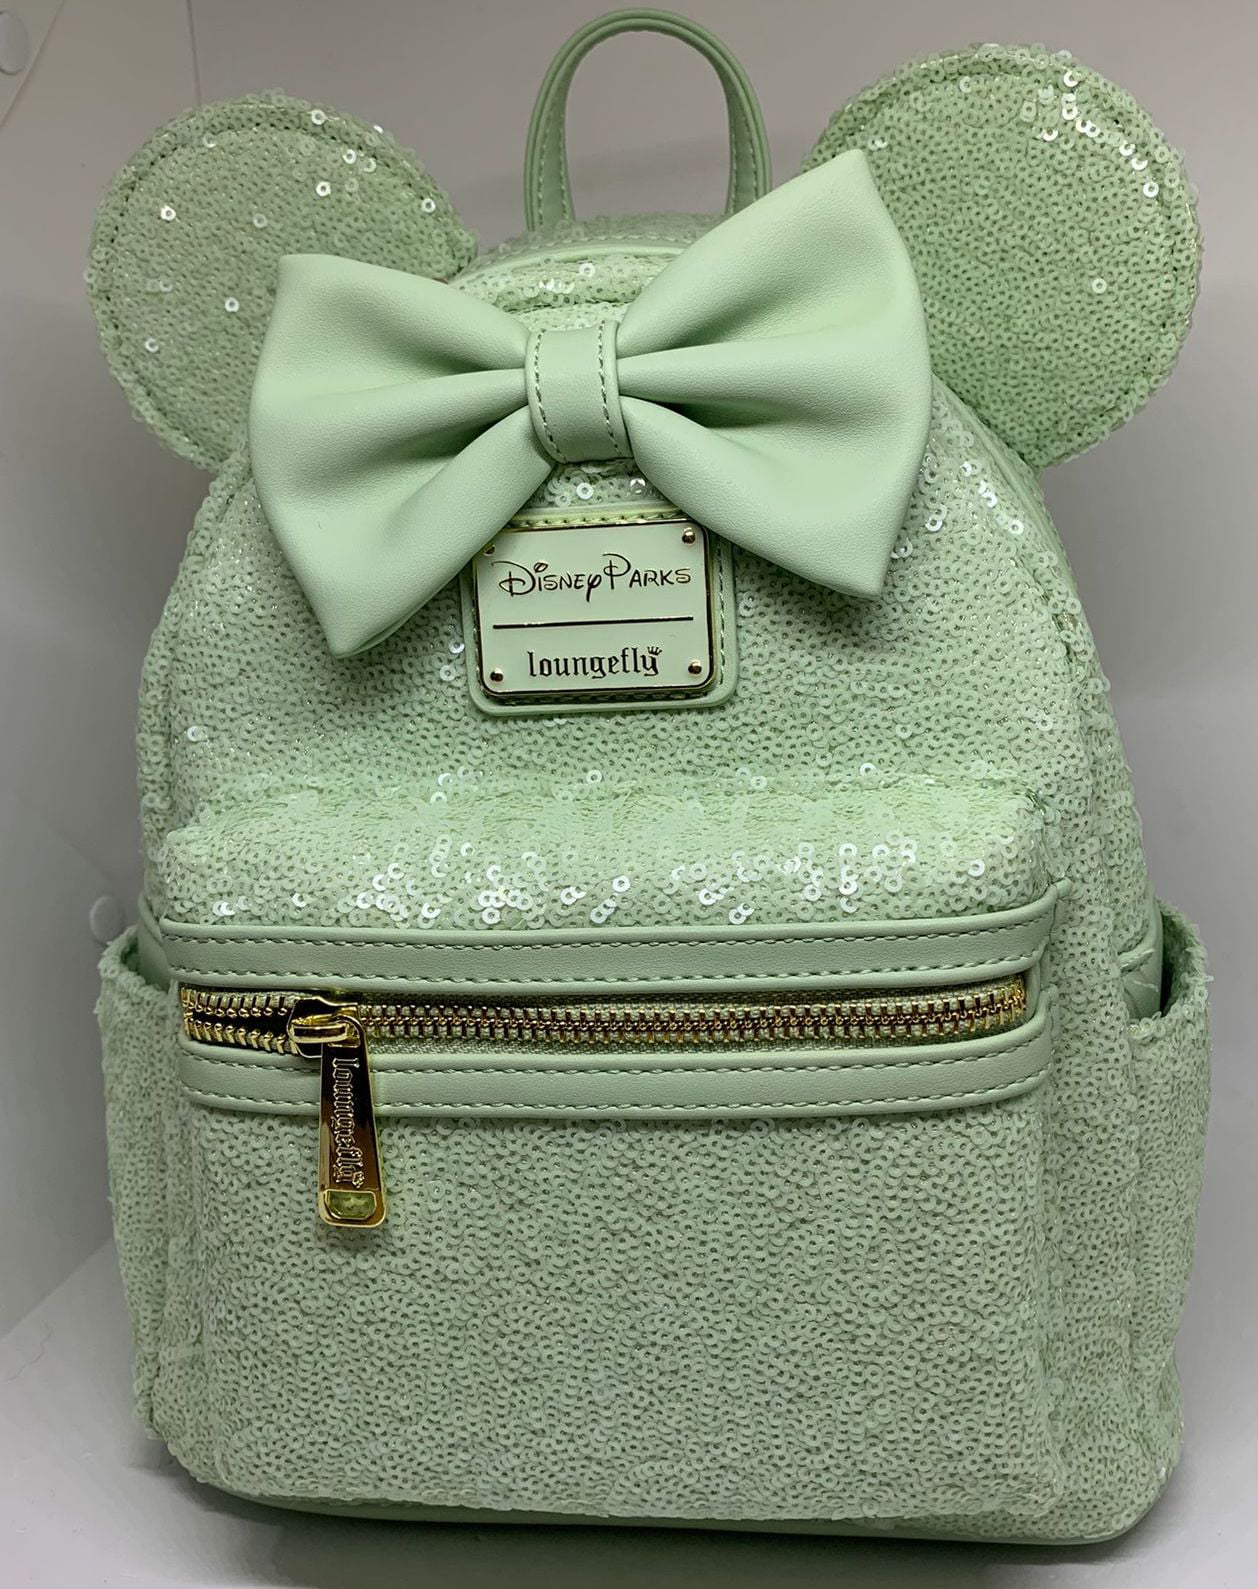 Disney Parks Loungefly Minnie Mouse Bow Mint Green Sequin Mini Backpack Wristlet 